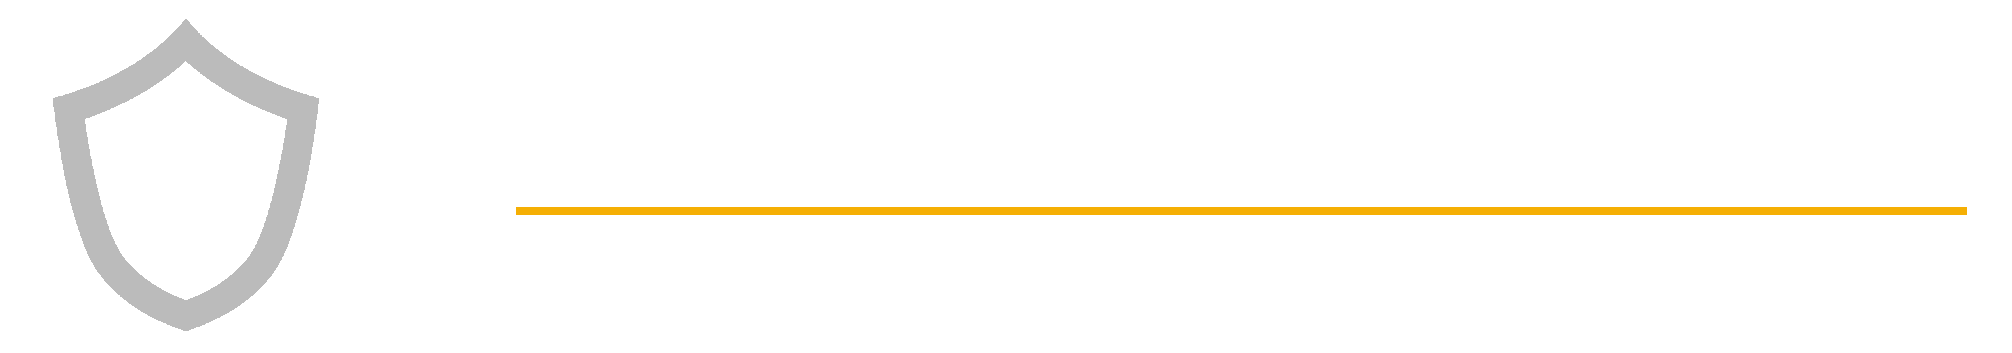 All That Gleams Vehicle Protection" logo includes a shield graphic on the left, with text in white and gold, emphasizing paint protection film.